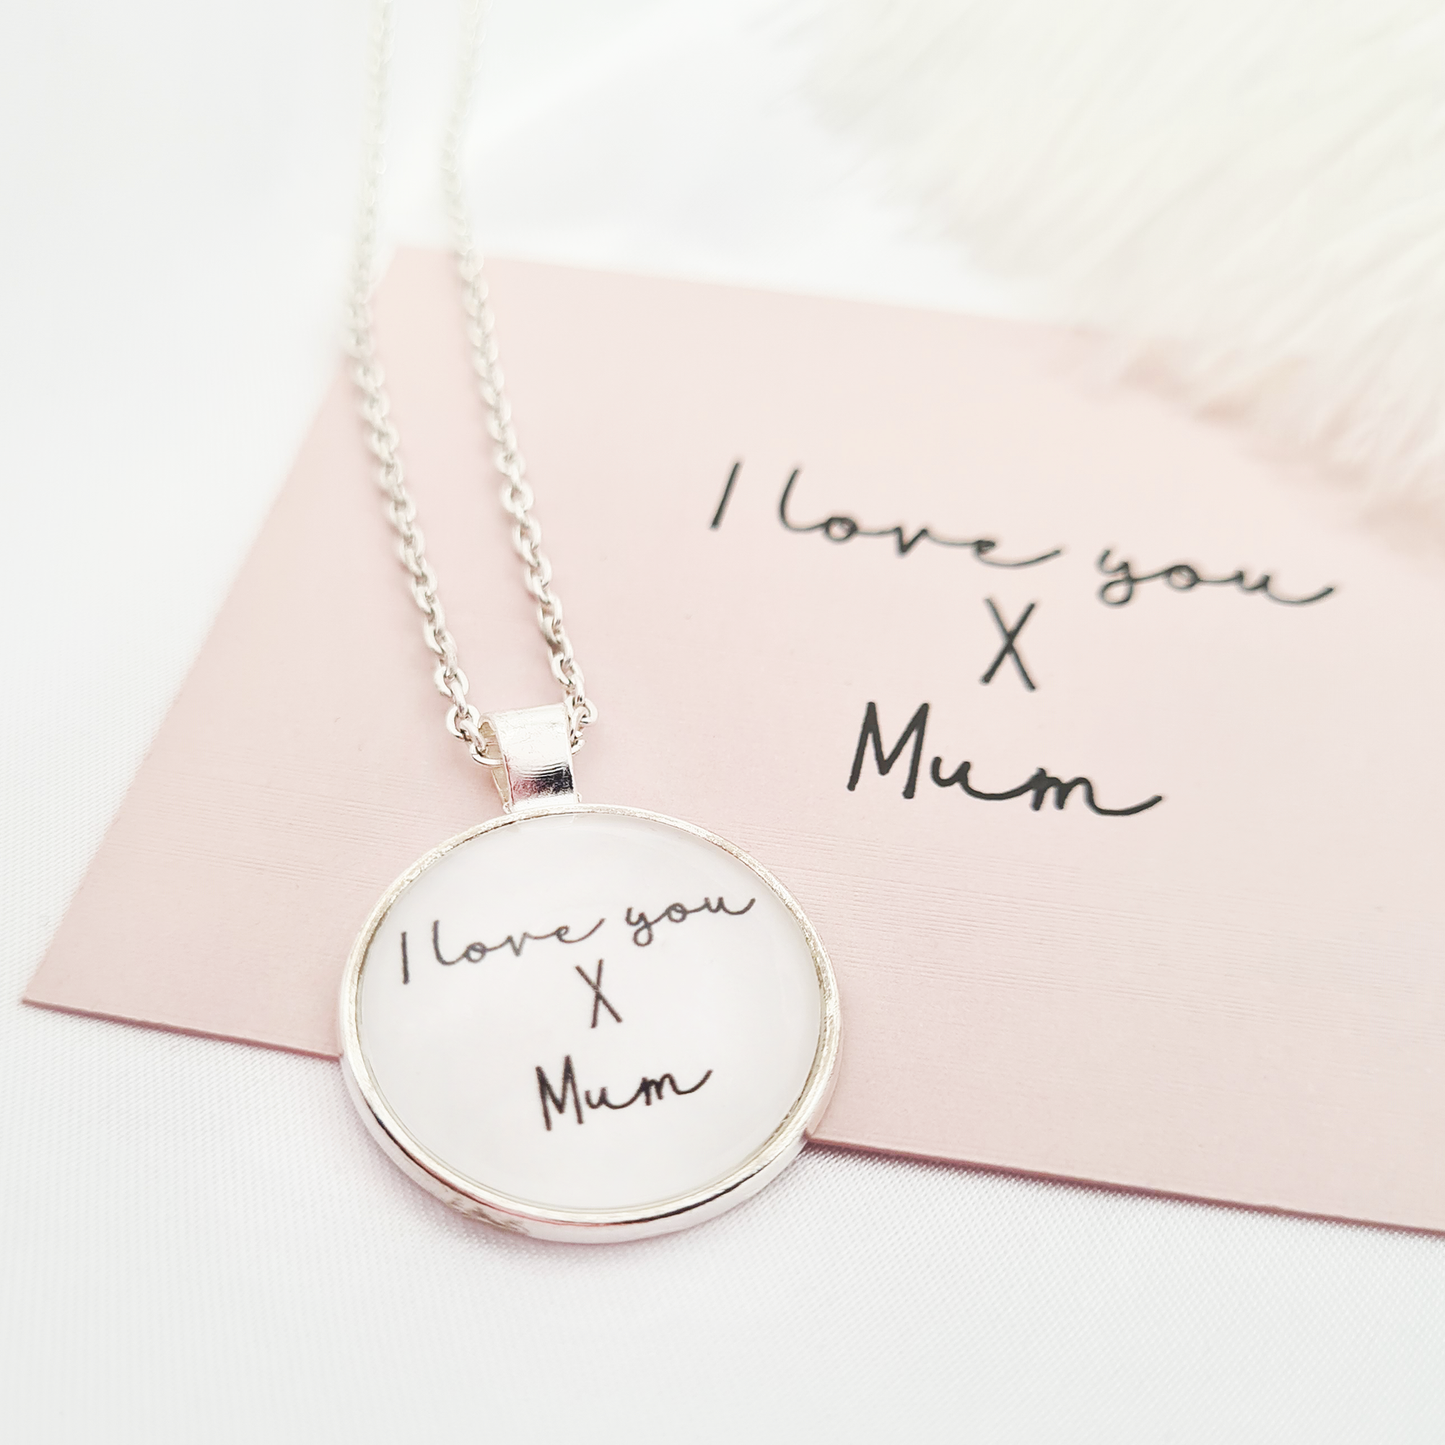 Personalised handwriting necklace pendant with silver chain and pink backing card